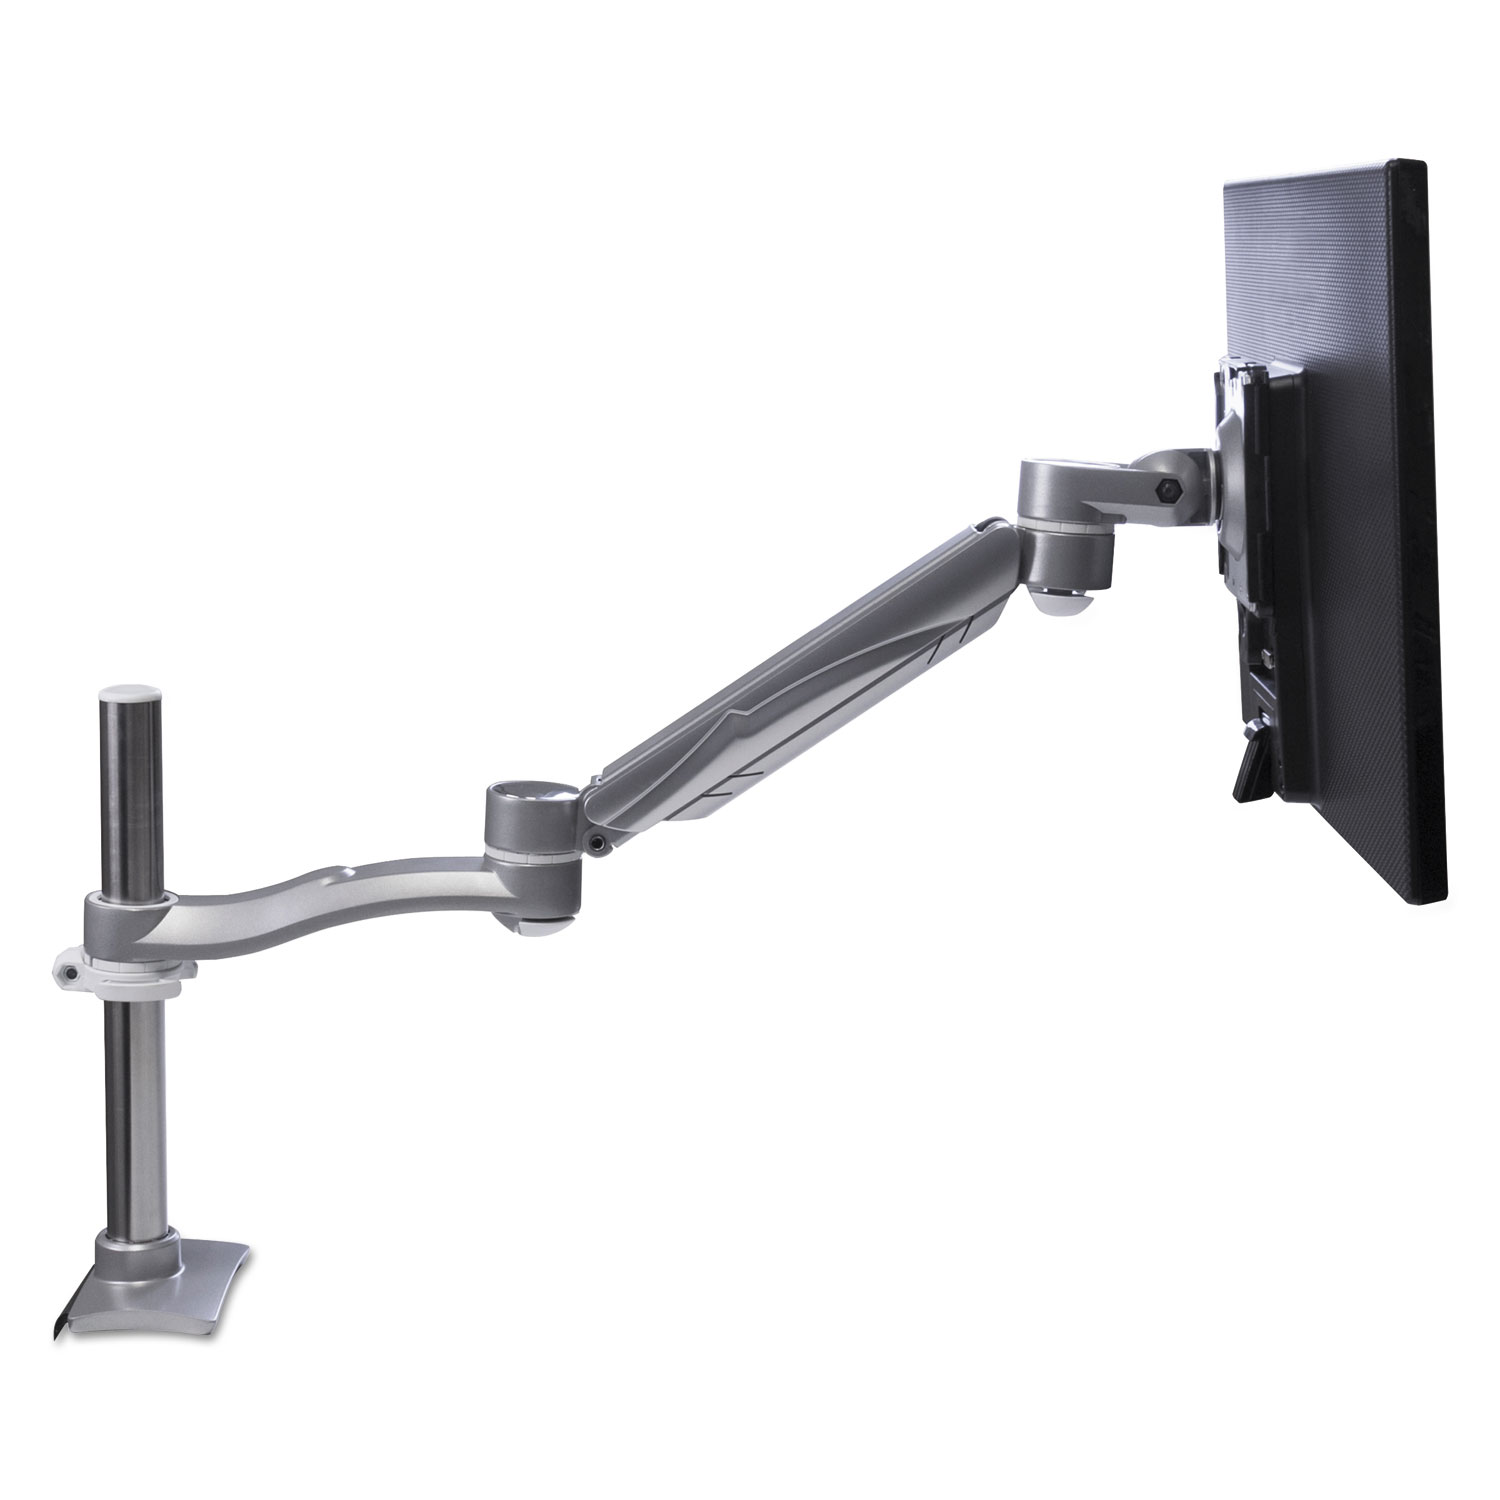 Monitor Arm for Flat Screen Monitors Up to 22